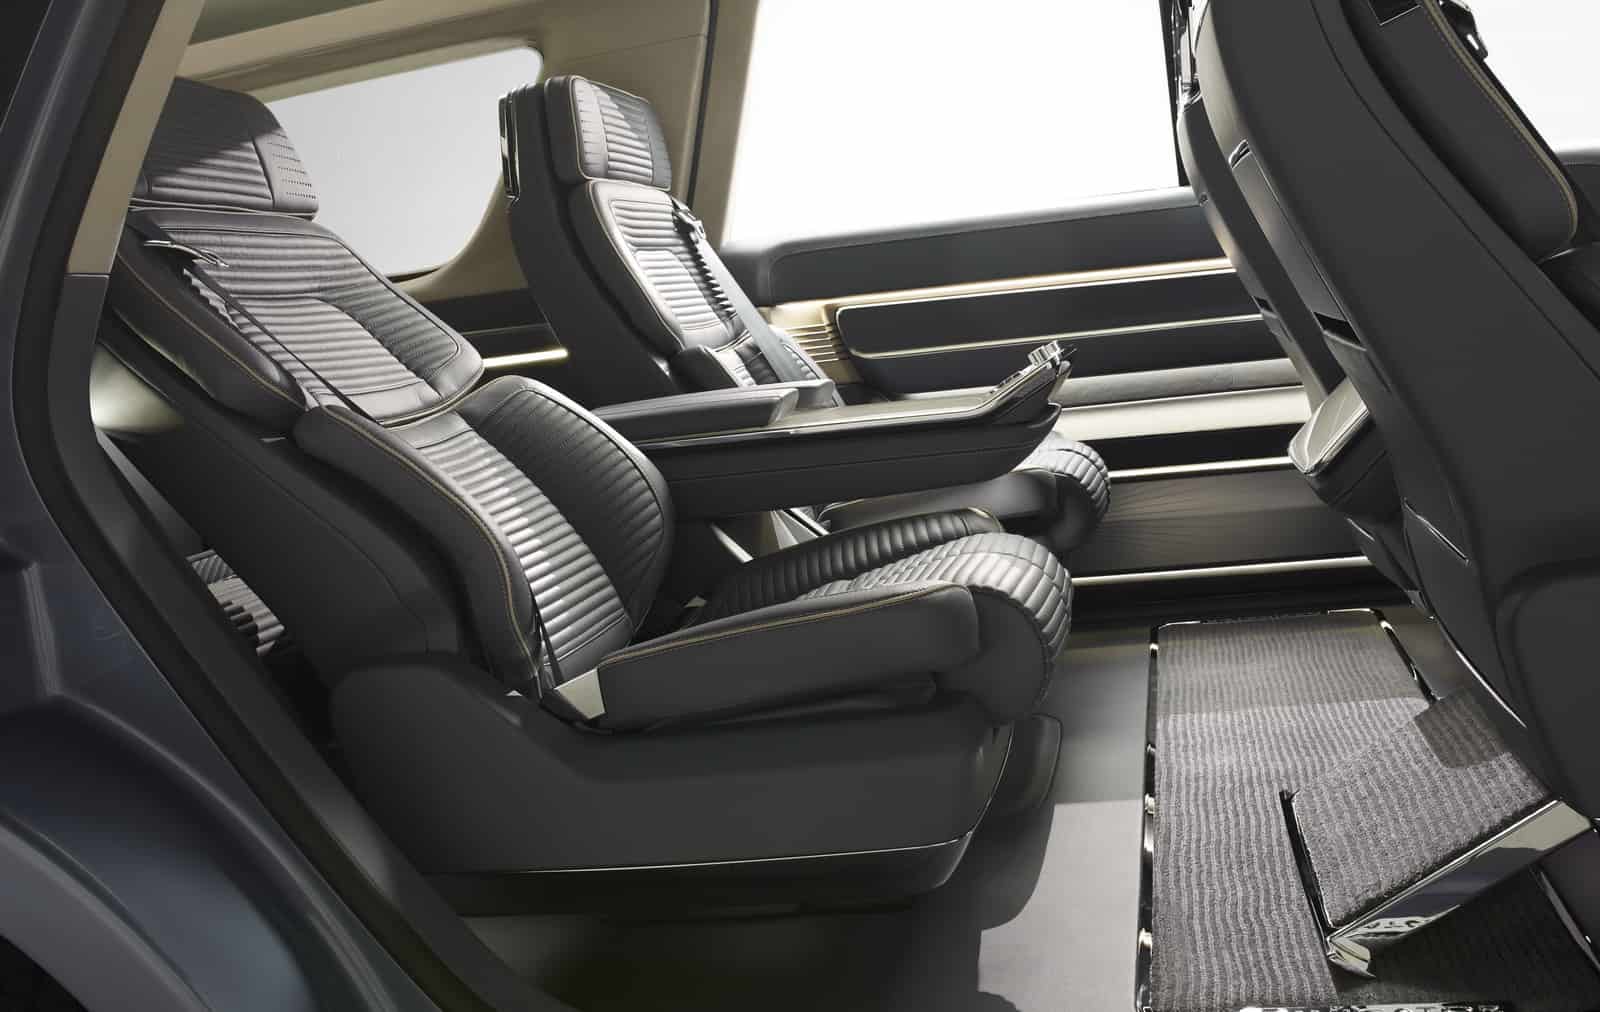 Rear seat occupants can enjoy a first class travel experience taking advantage of the extensive legroom and reclining, heating, cooling and massage functionality of the Perfect Position seats and rear audio and climate controls.